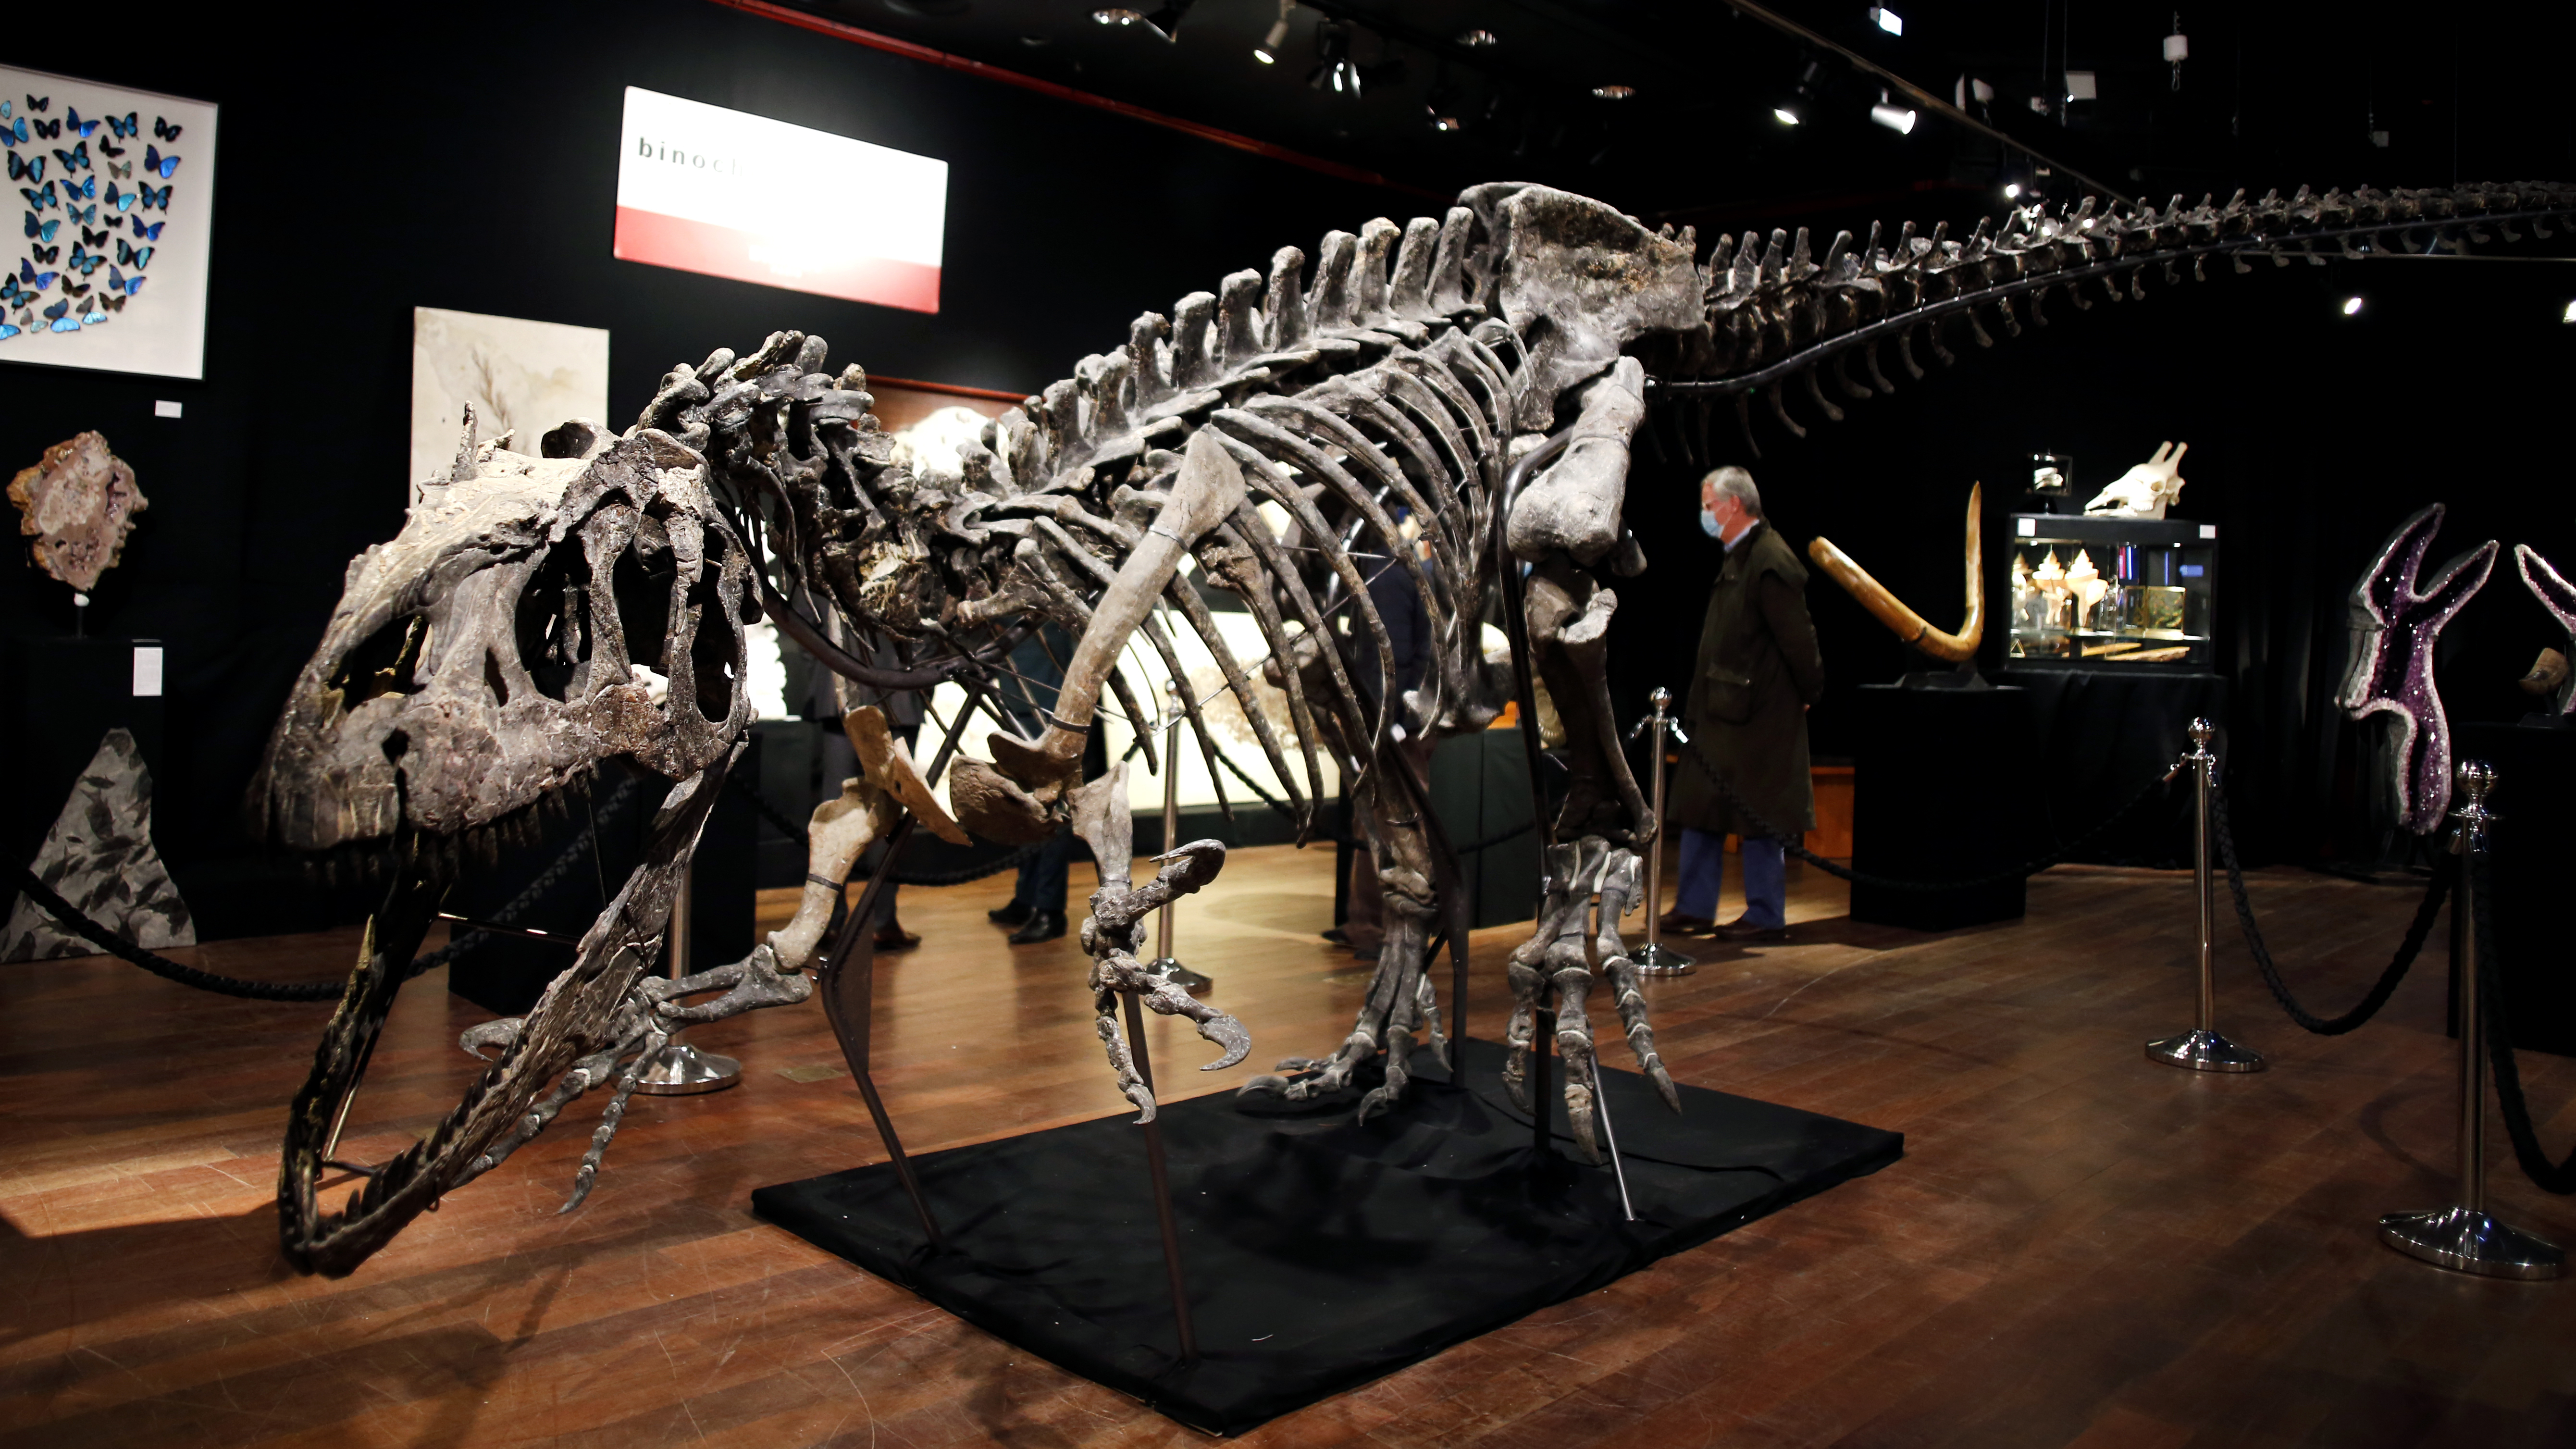 A skeleton of an Allosaurus on display at Drouot auction house in Paris in October. A new theory says the dinosaurs were killed by a comet fragment that originally came from the edge of the solar system. CREDIT: Thibault Camus/AP